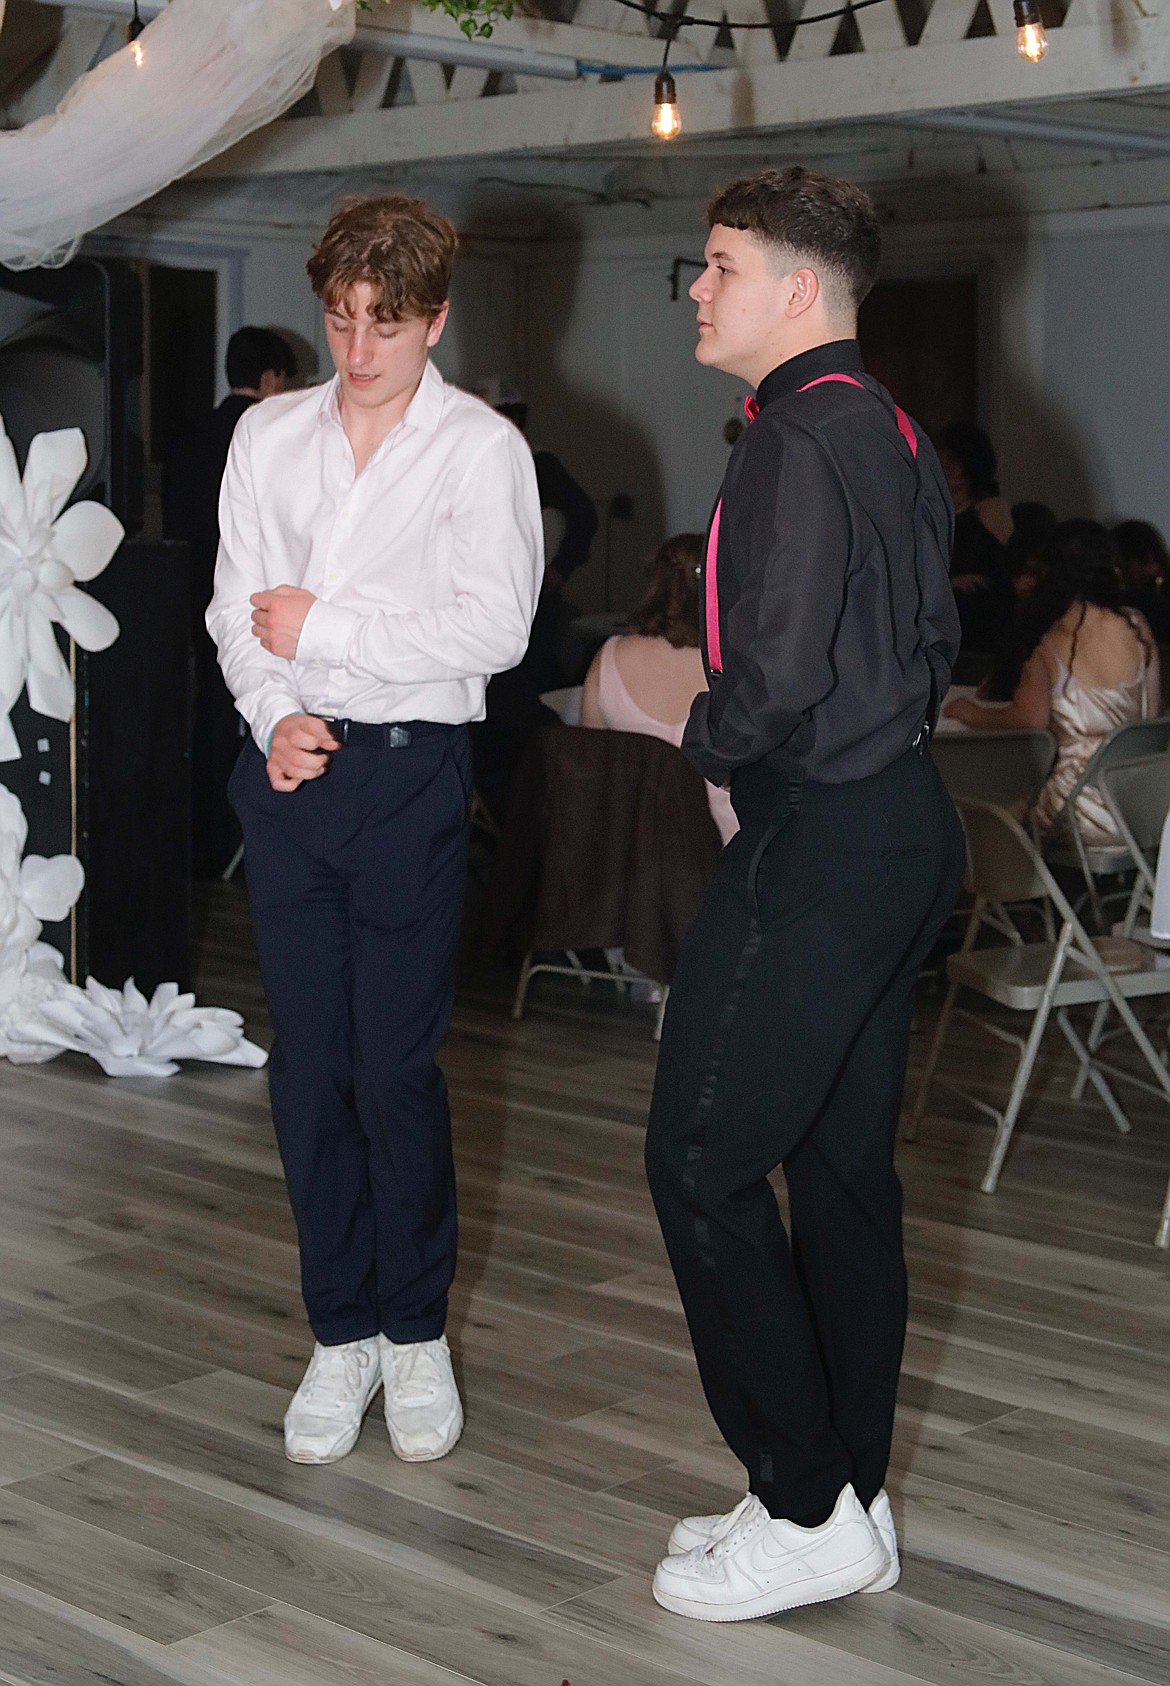 Foreign exchange students, (left) Flip Hoes from Rotterdam, Netherlands and (right) Eduardo (Eddy) Perianez from Seville, Spain on the dance floor enjoying the Plains High School prom. (Jessica Peterson photo)